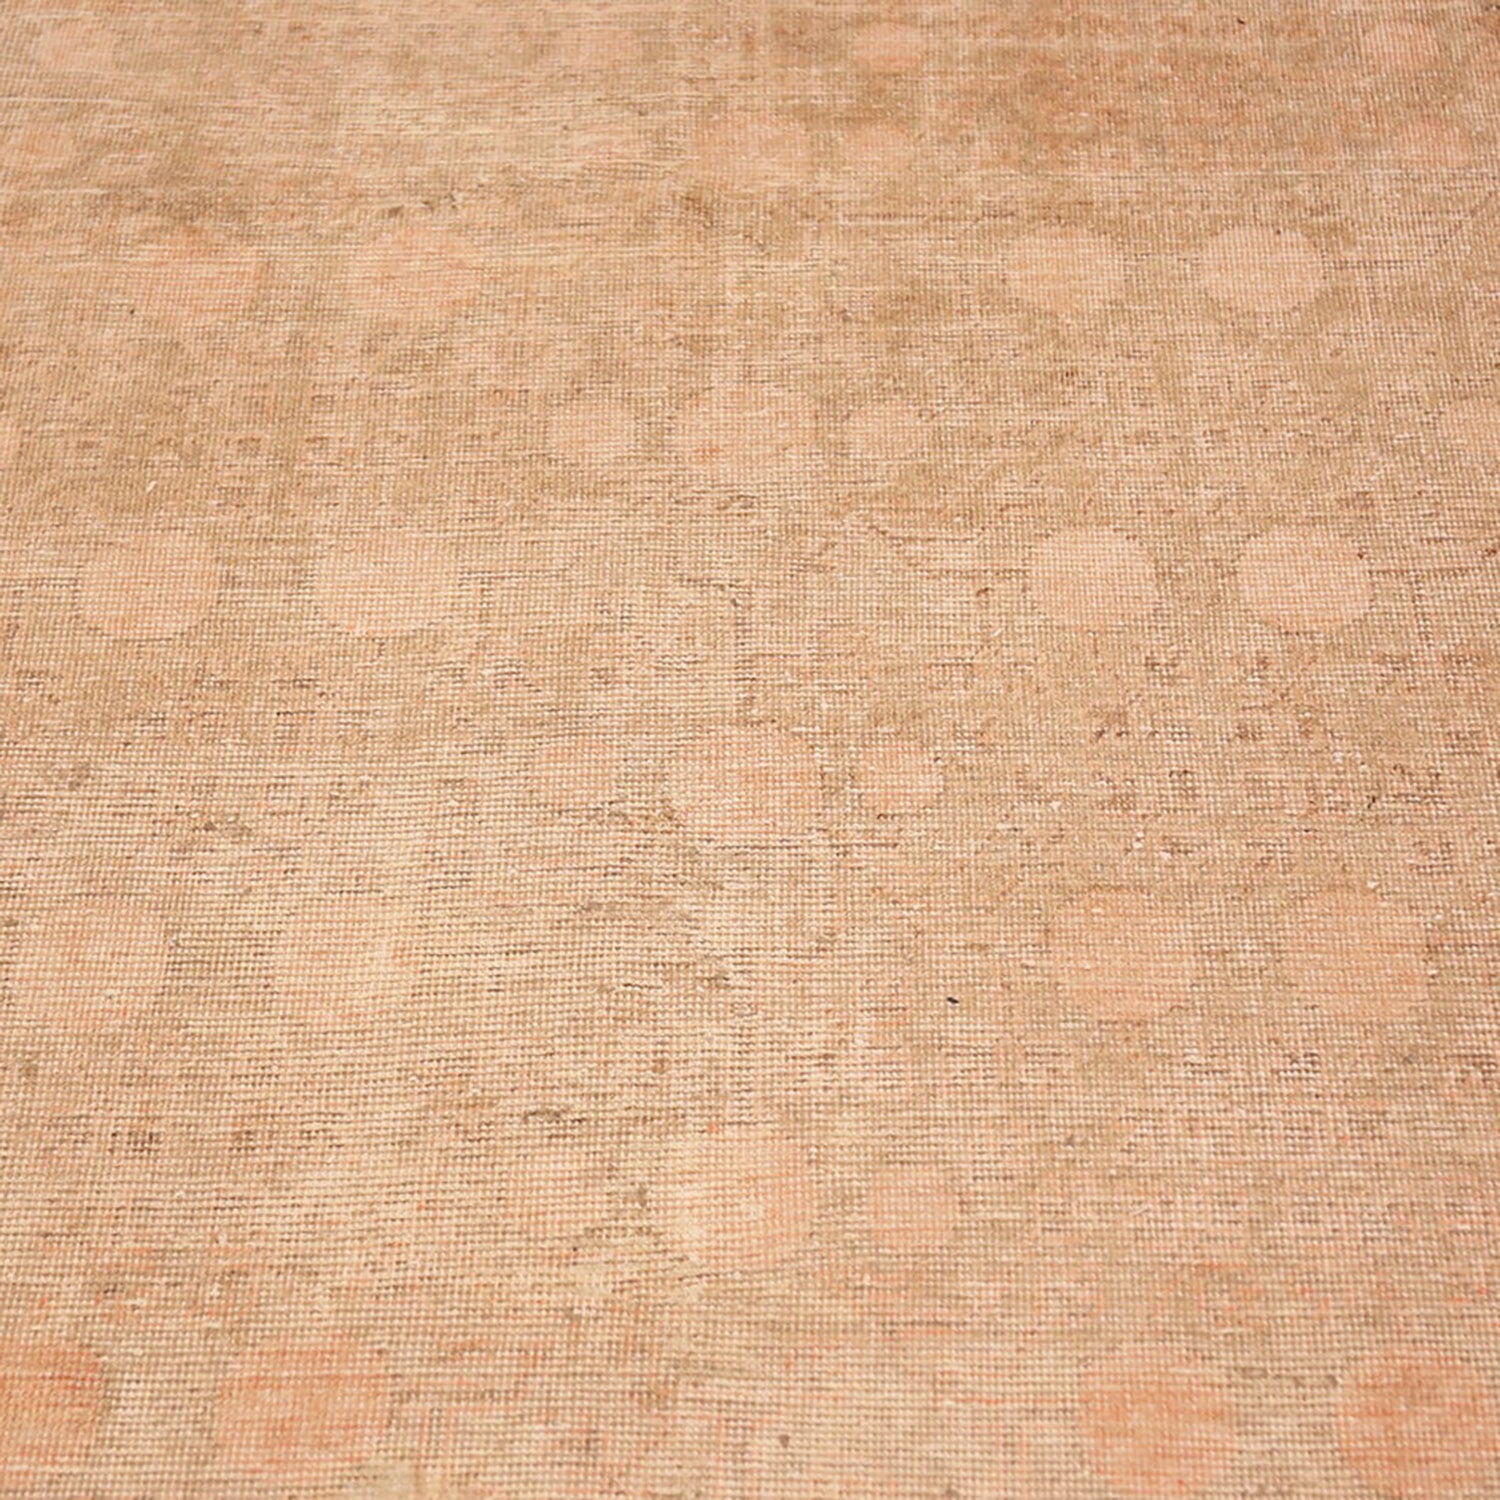 Close-up view of a beige textured surface with circular patterns.